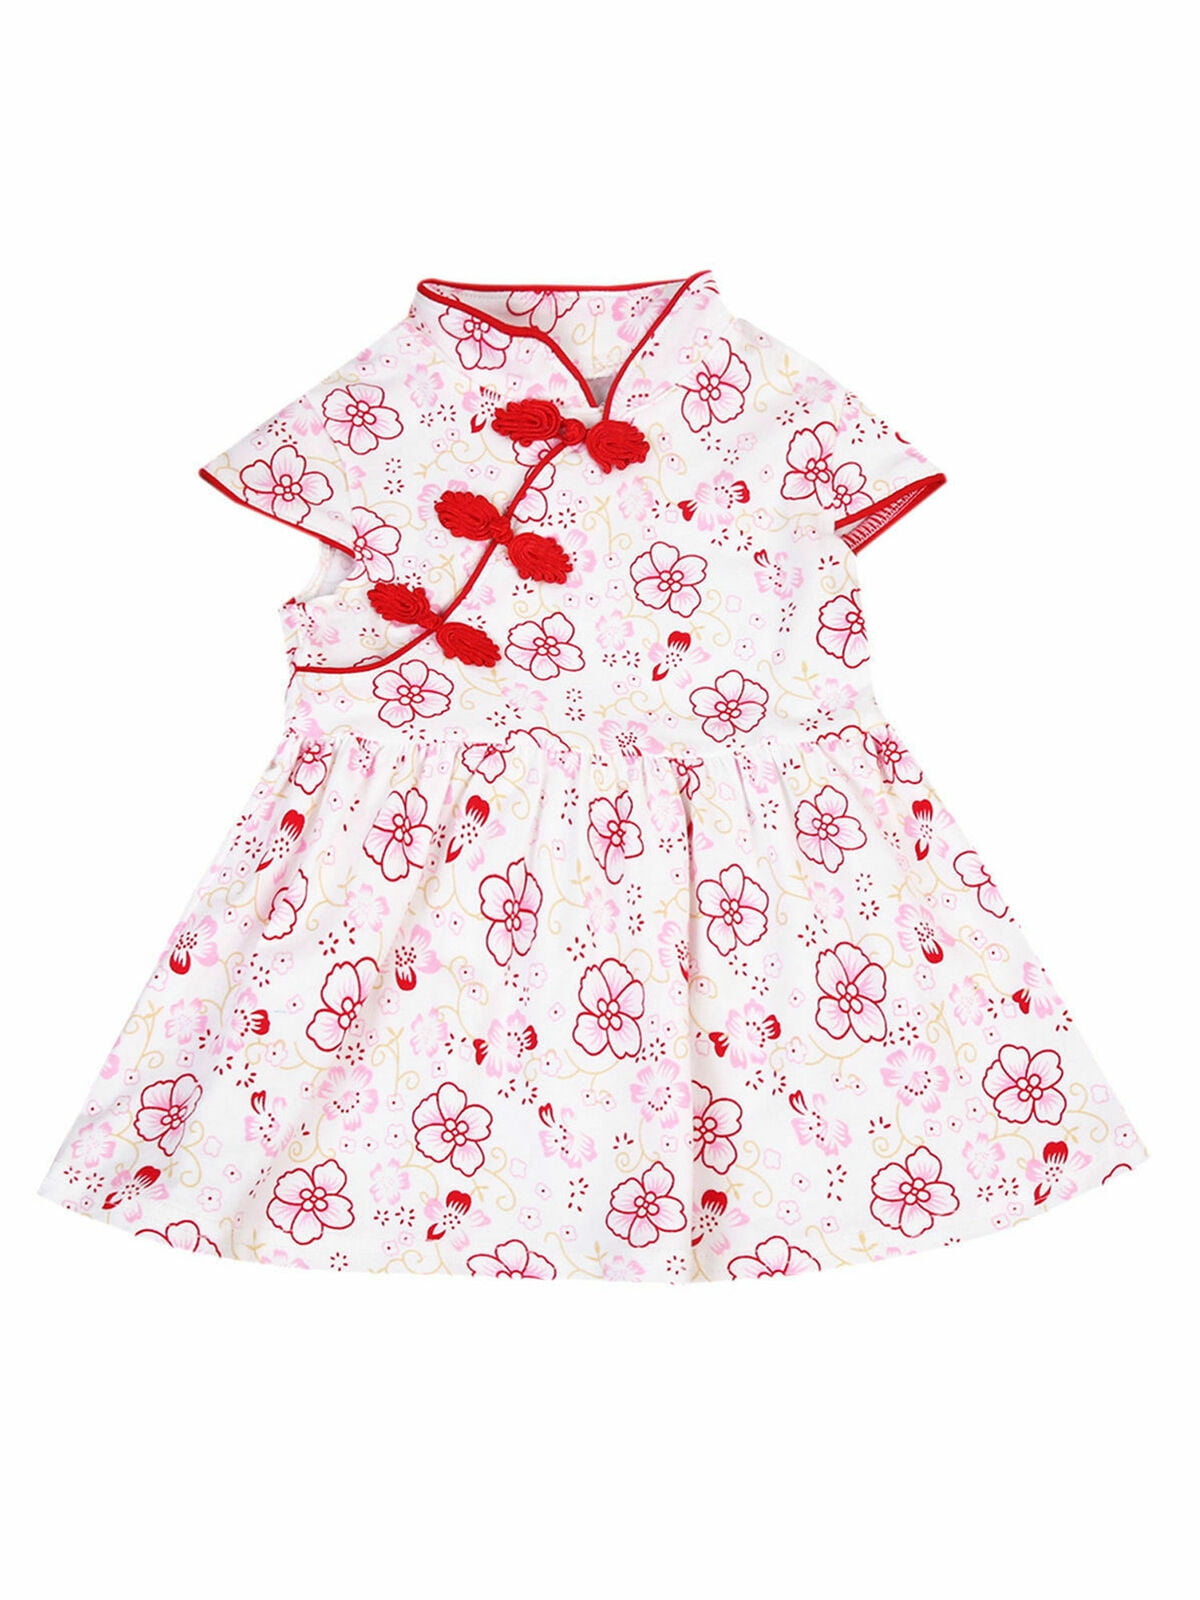 New Girls Chinese Cheongsam Size 2T Baby Girls Adorable Dress Pink Red Blue Gold